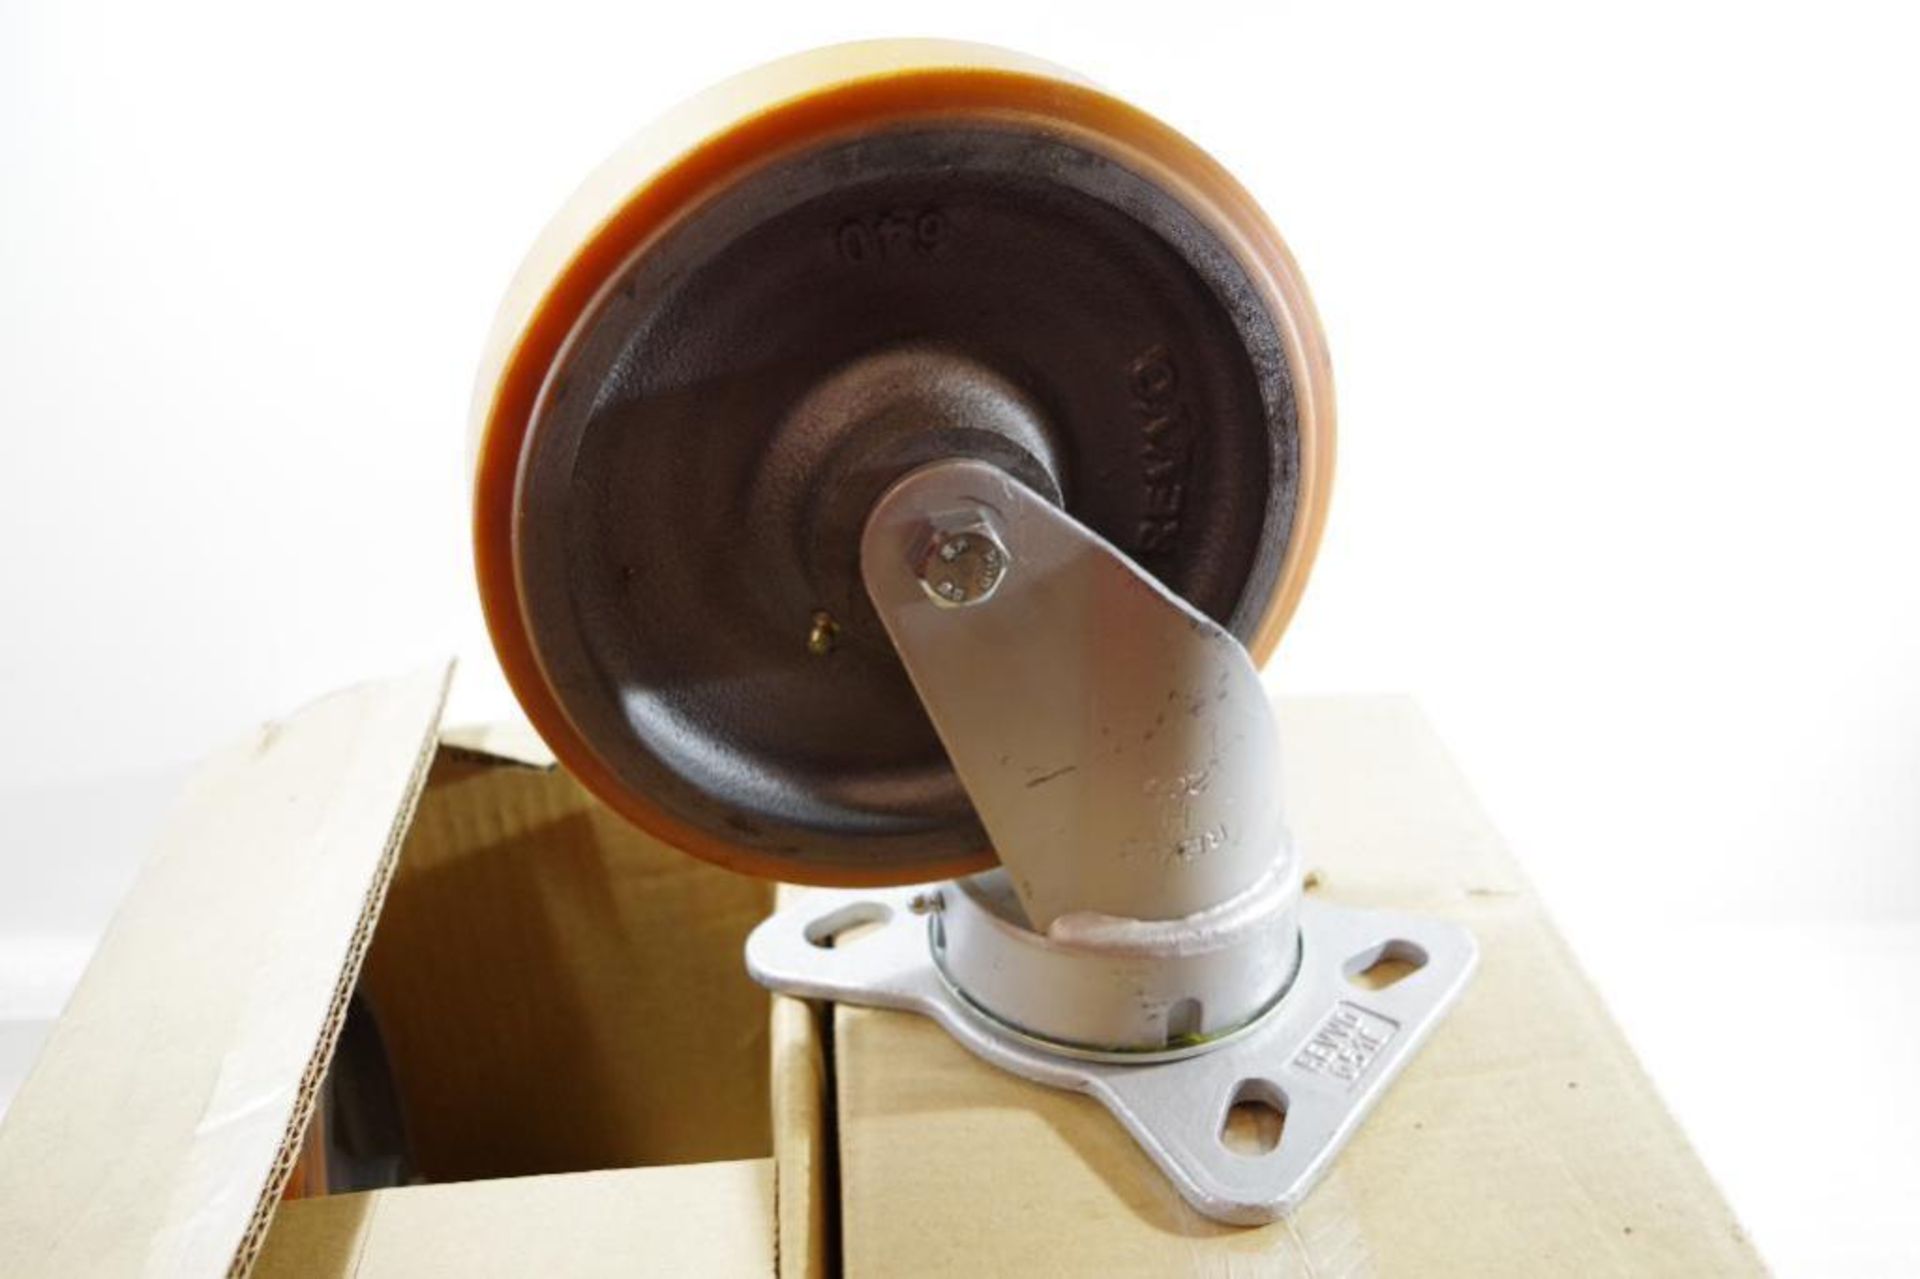 [4] 8" Medium-Duty Kingpinless Swivel Plate Caster, 2420 lb. Load Rating, (2 Boxes of 2 Each) - Image 2 of 3